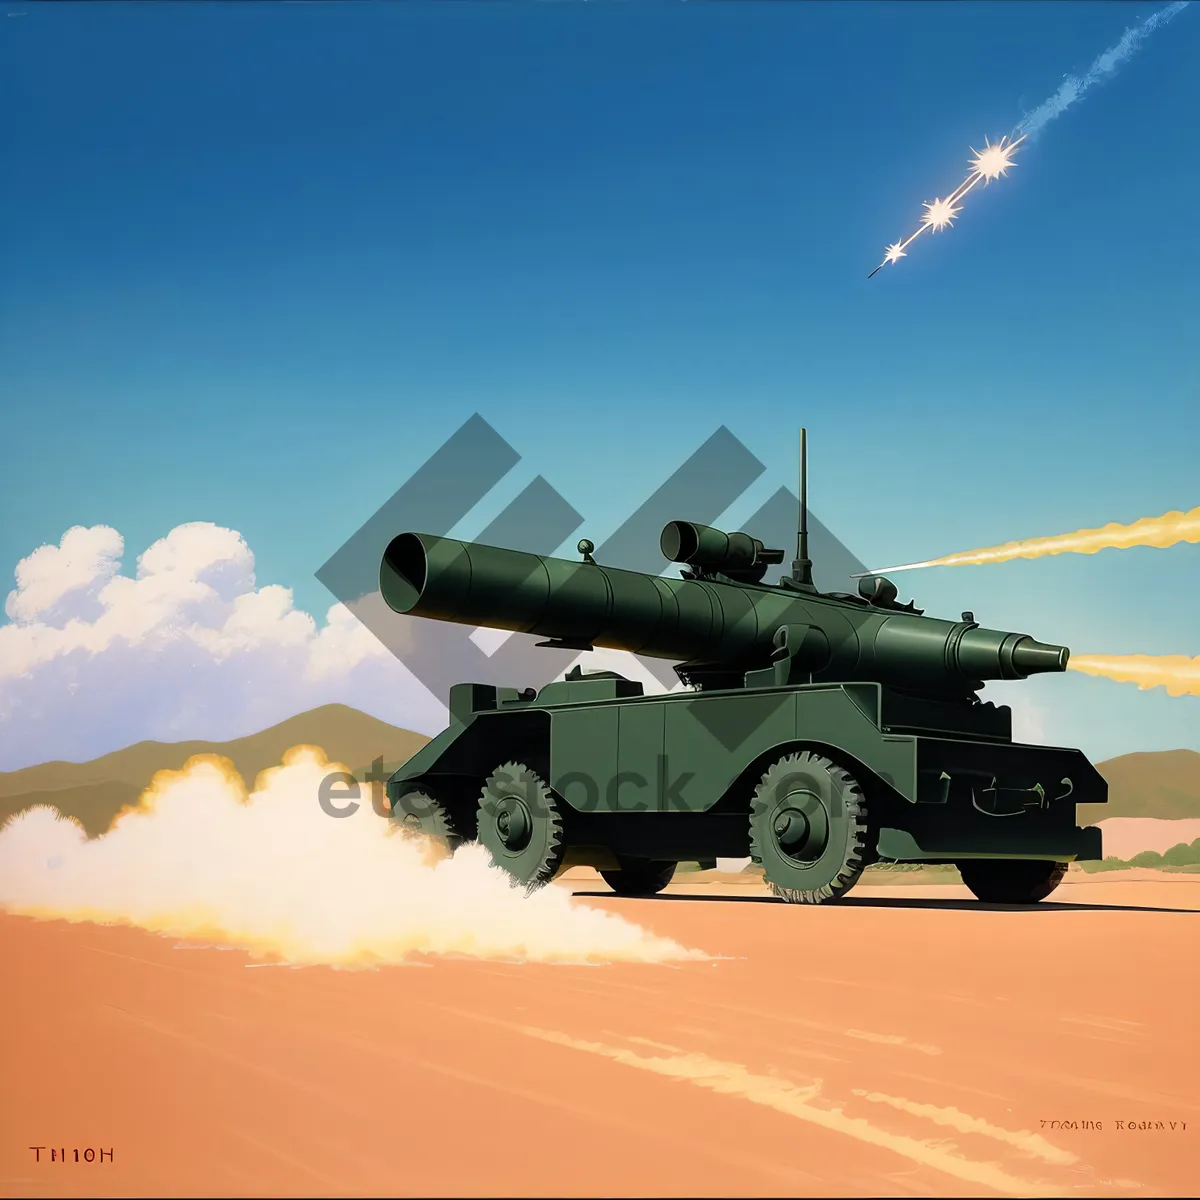 Picture of Skyborne Military Jet Rocket Launcher in Action